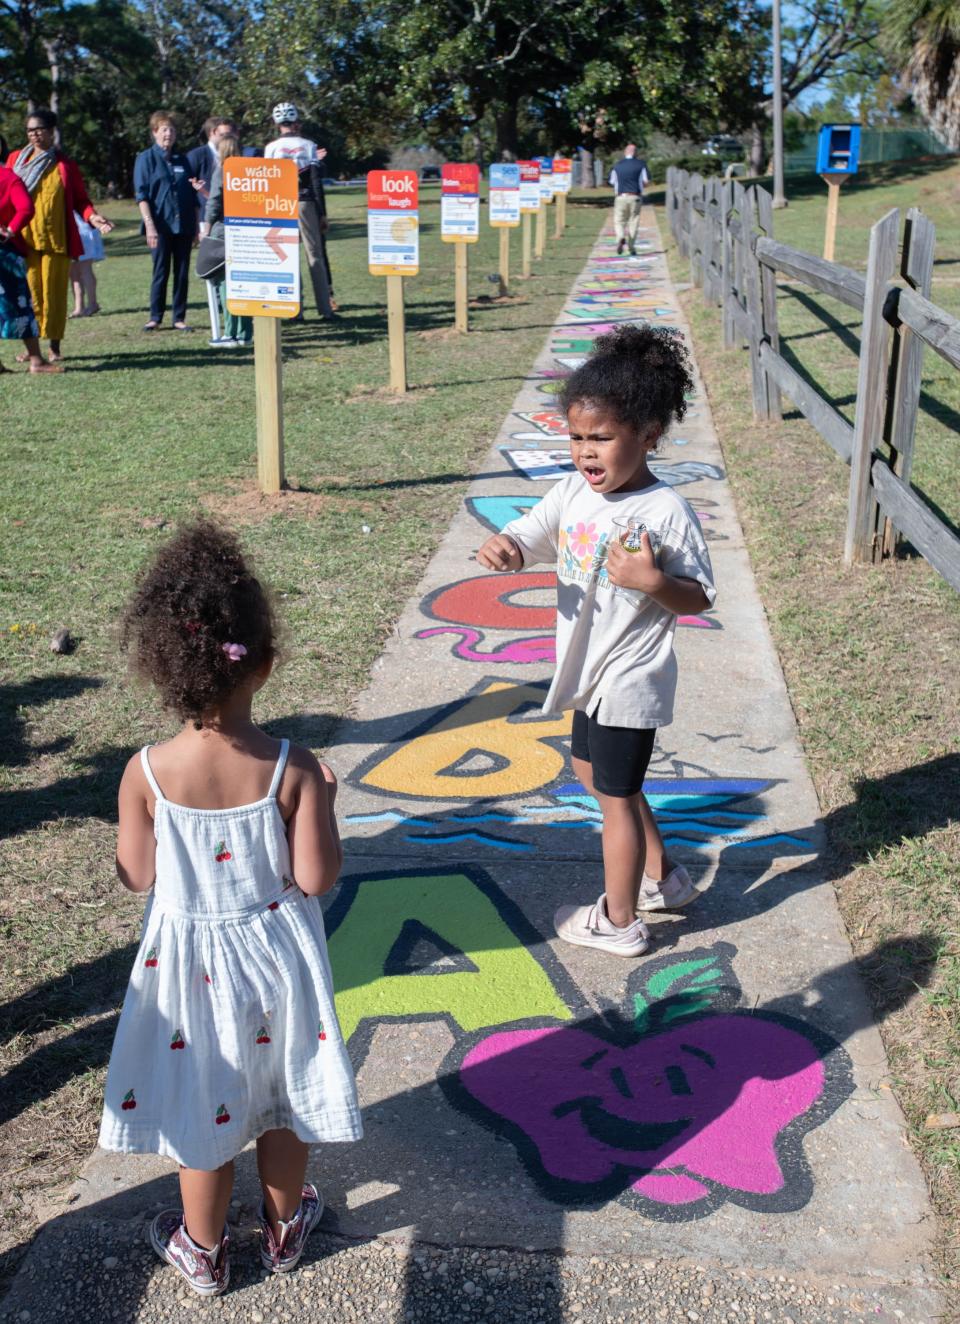 Georgia Smith, 4, right, goes over her ABC's as she walks with her sister Indie, 2, along the new Born Learning Trail at Bayview Park in Pensacola on Tuesday, Oct. 24, 2023. This newest Born Learning Trail was created by the Pensacola News Journal in association with Ready Kids!, the United Way of West Florida, and the Sunstone Project.